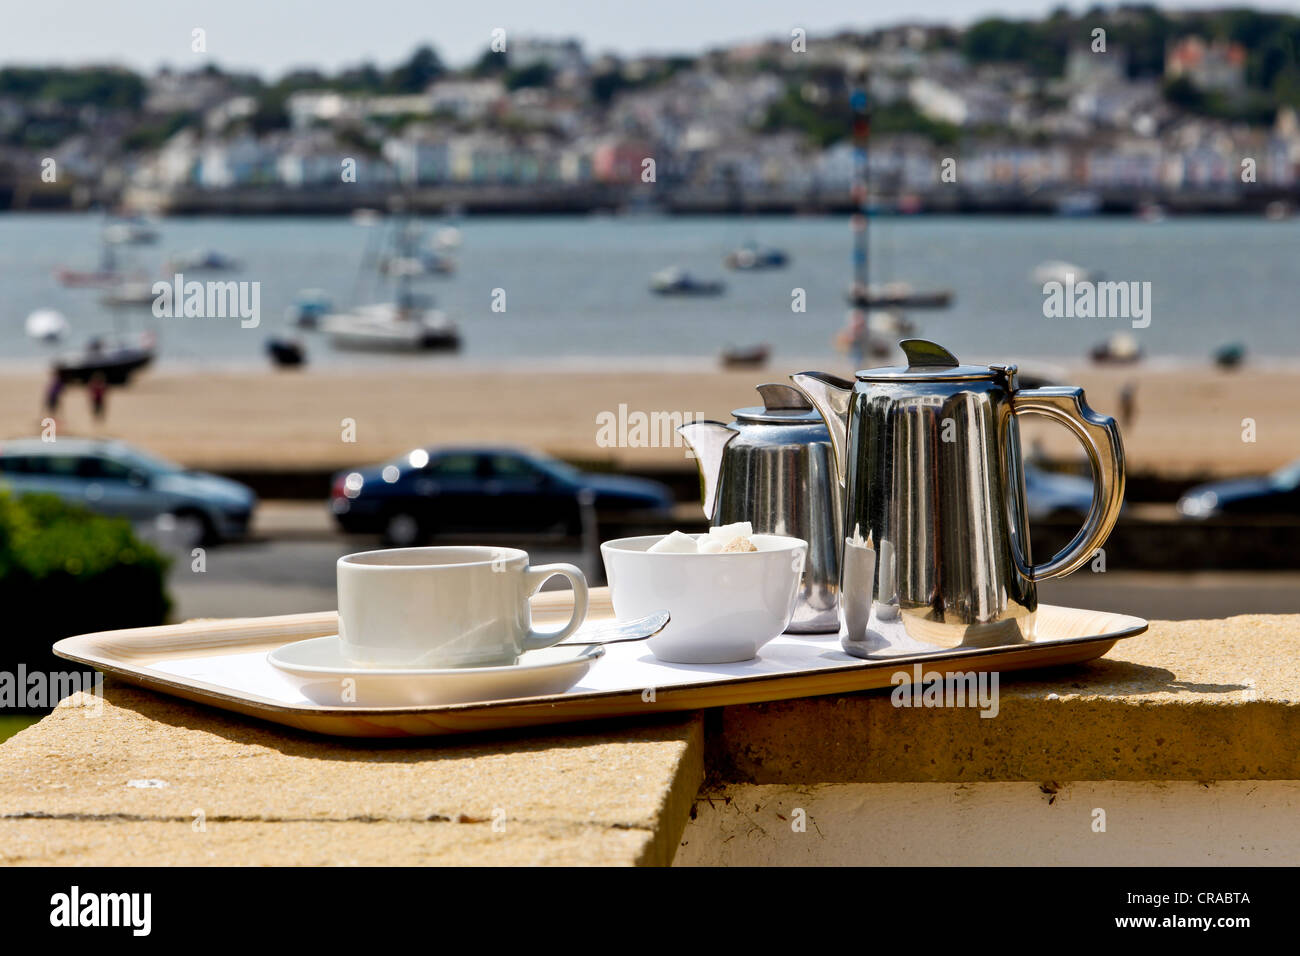 A traditional British or English tea set with a seaside setting Stock Photo